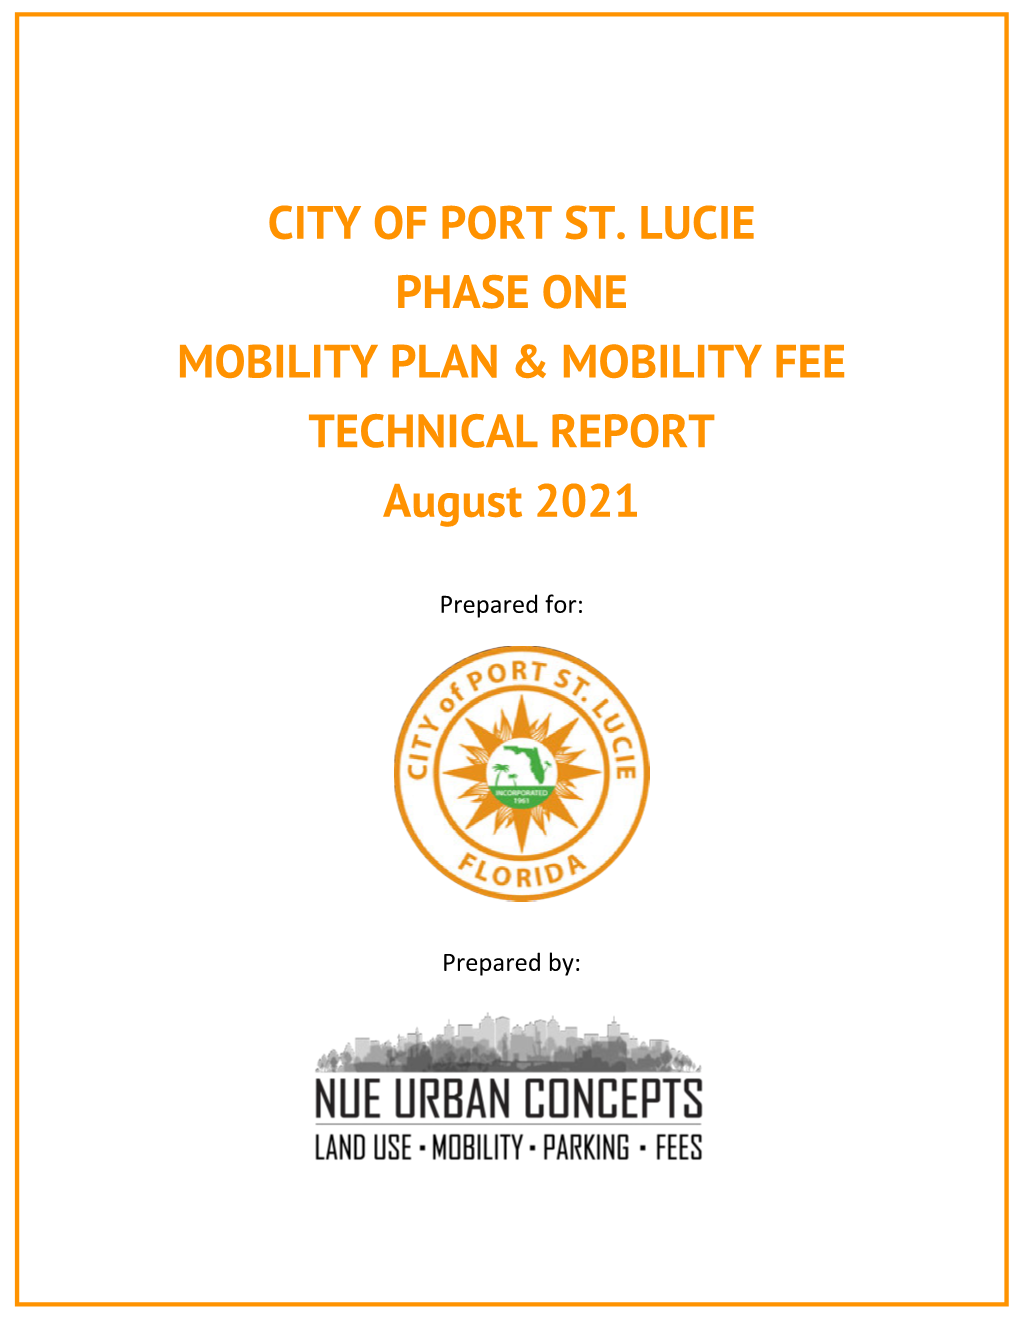 Mobility Plan & Fee Technical Report